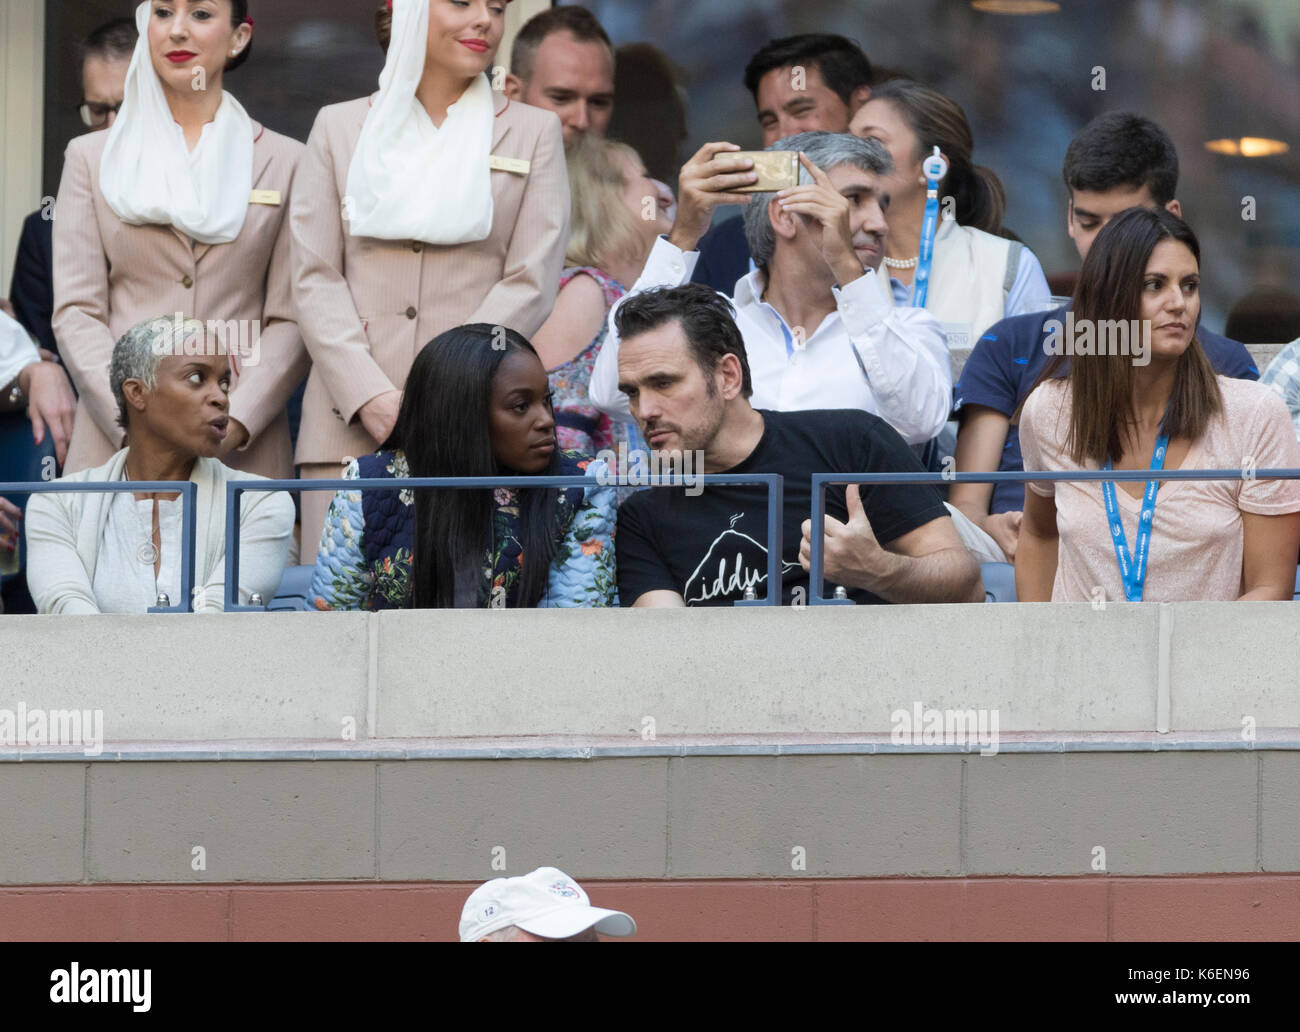 New York, NY USA - September 10, 2017: Sloane Stephens, Matt Dillon attend final match between Rafael Nadal of Spain & Kevin Anderson of South Africa at US Open Championships at Billie Jean King National Tennis Center Stock Photo